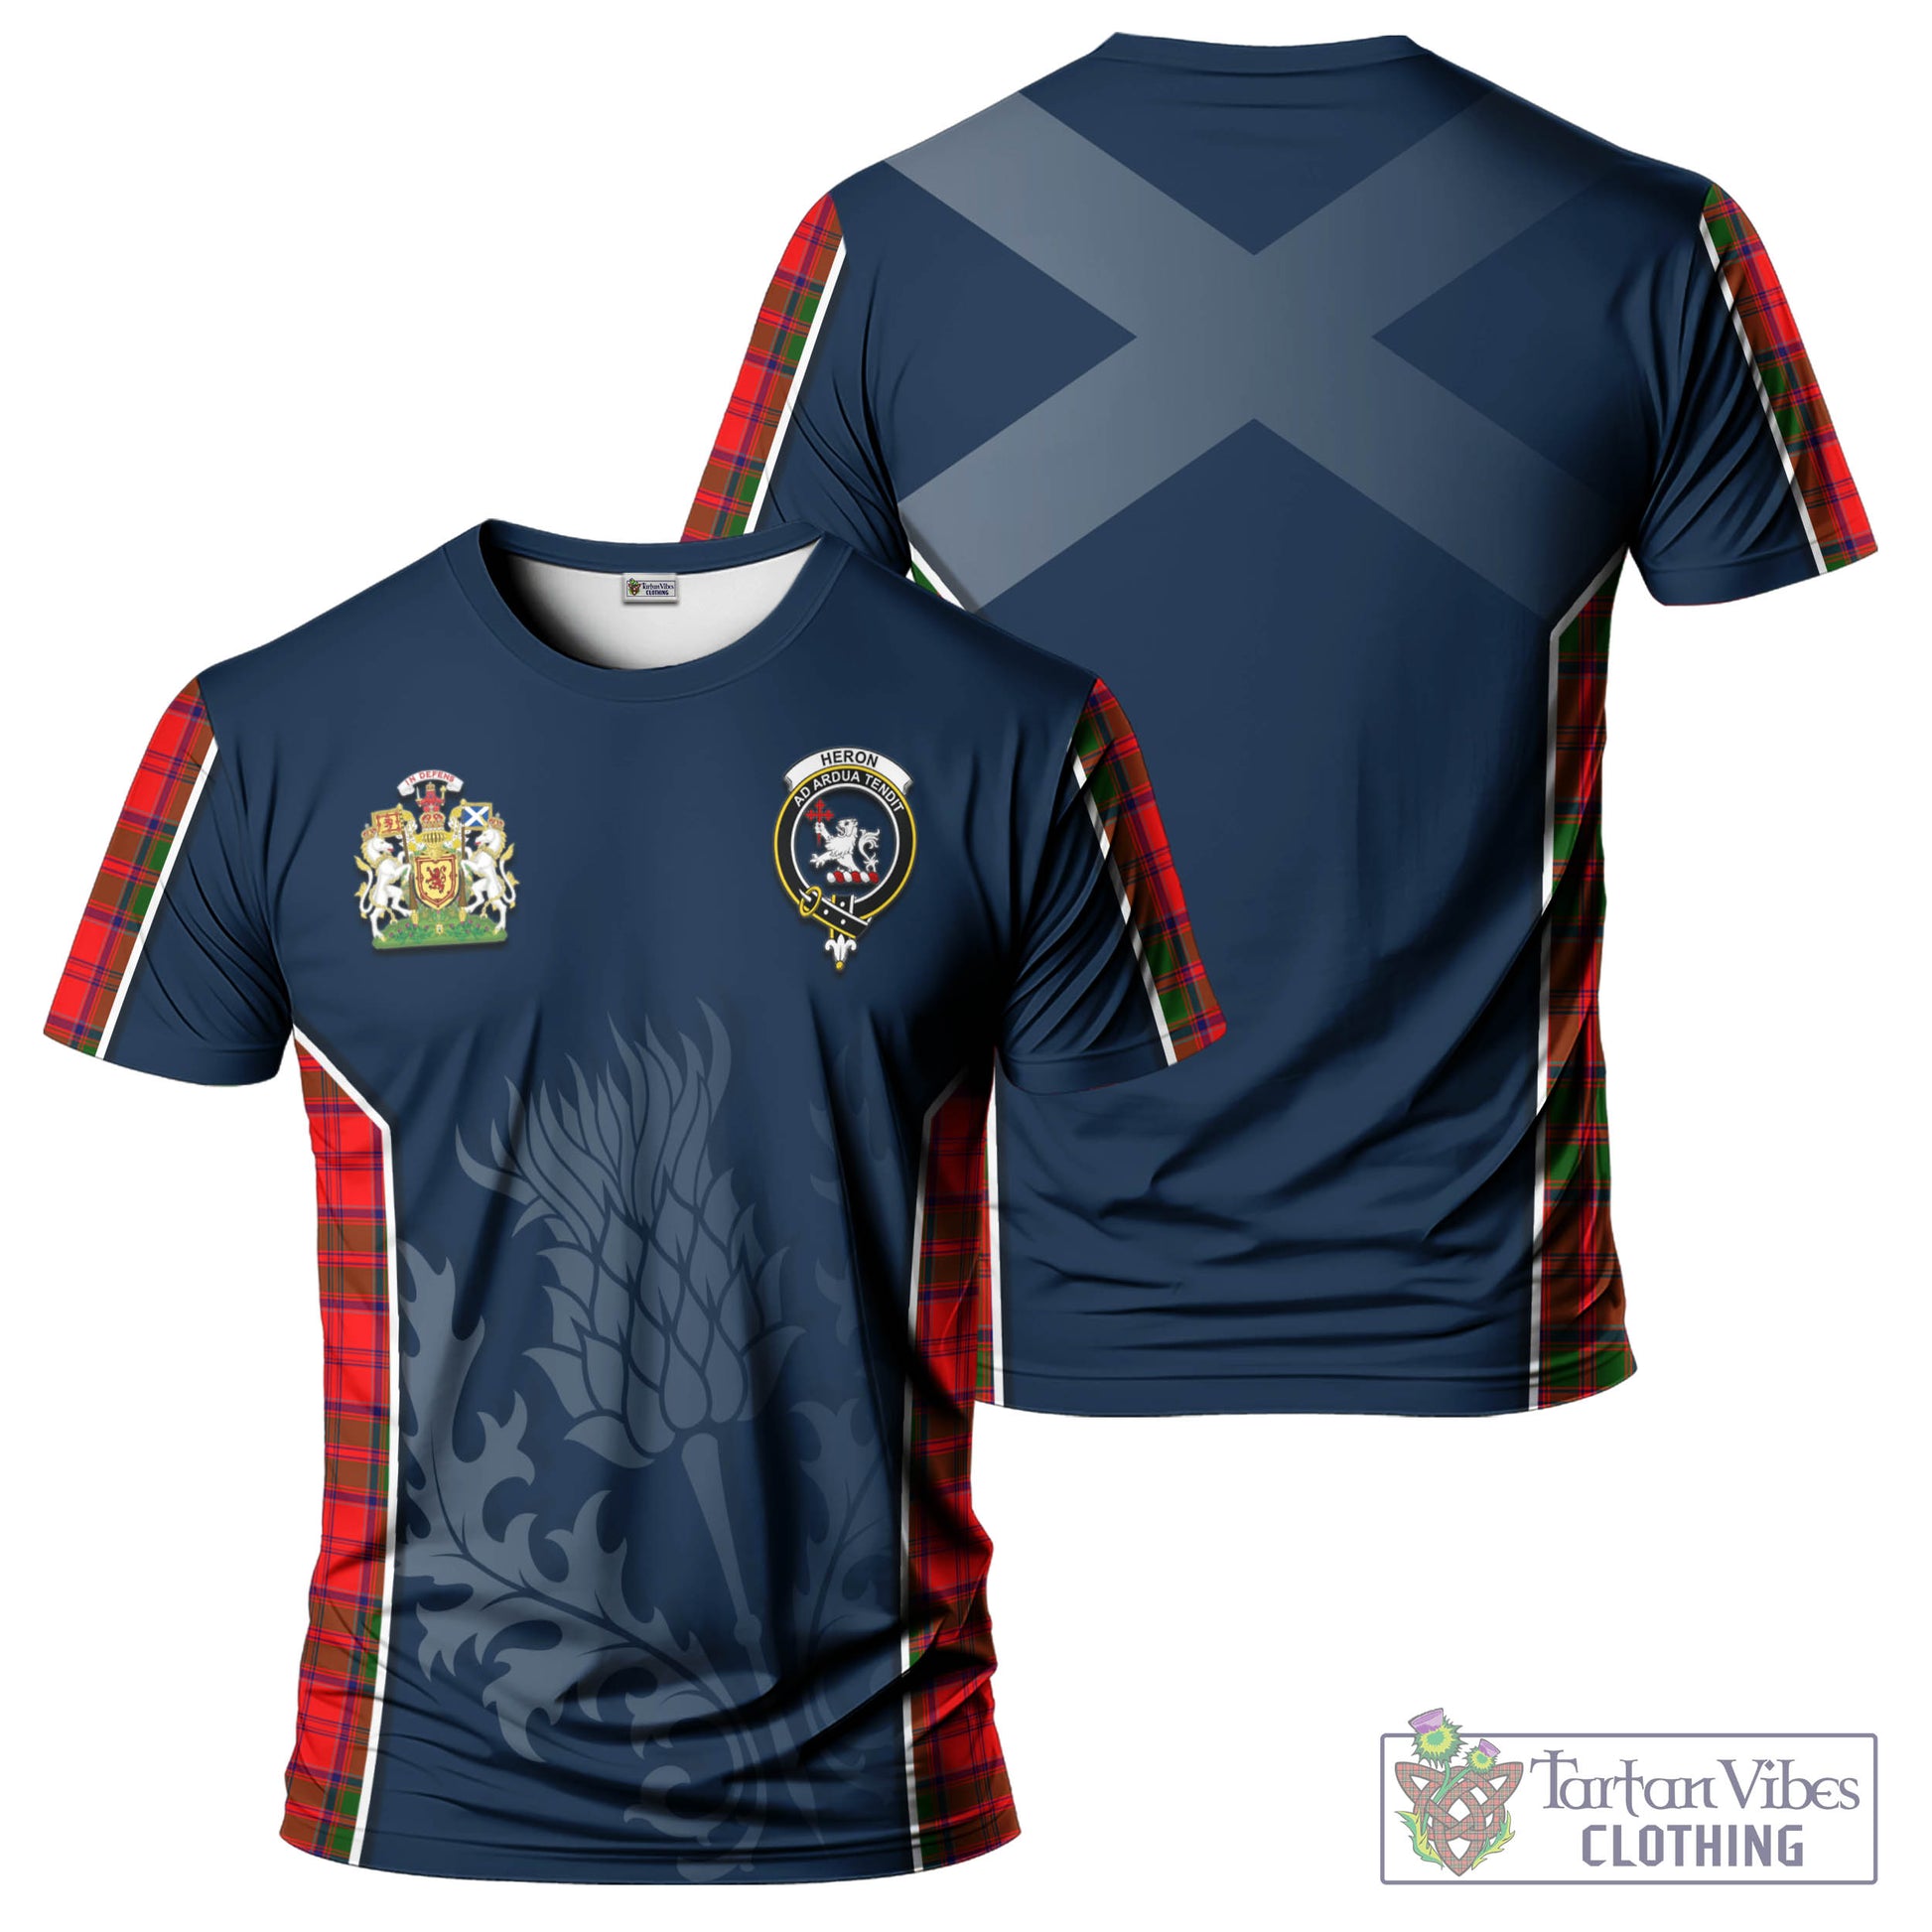 Tartan Vibes Clothing Heron Tartan T-Shirt with Family Crest and Scottish Thistle Vibes Sport Style